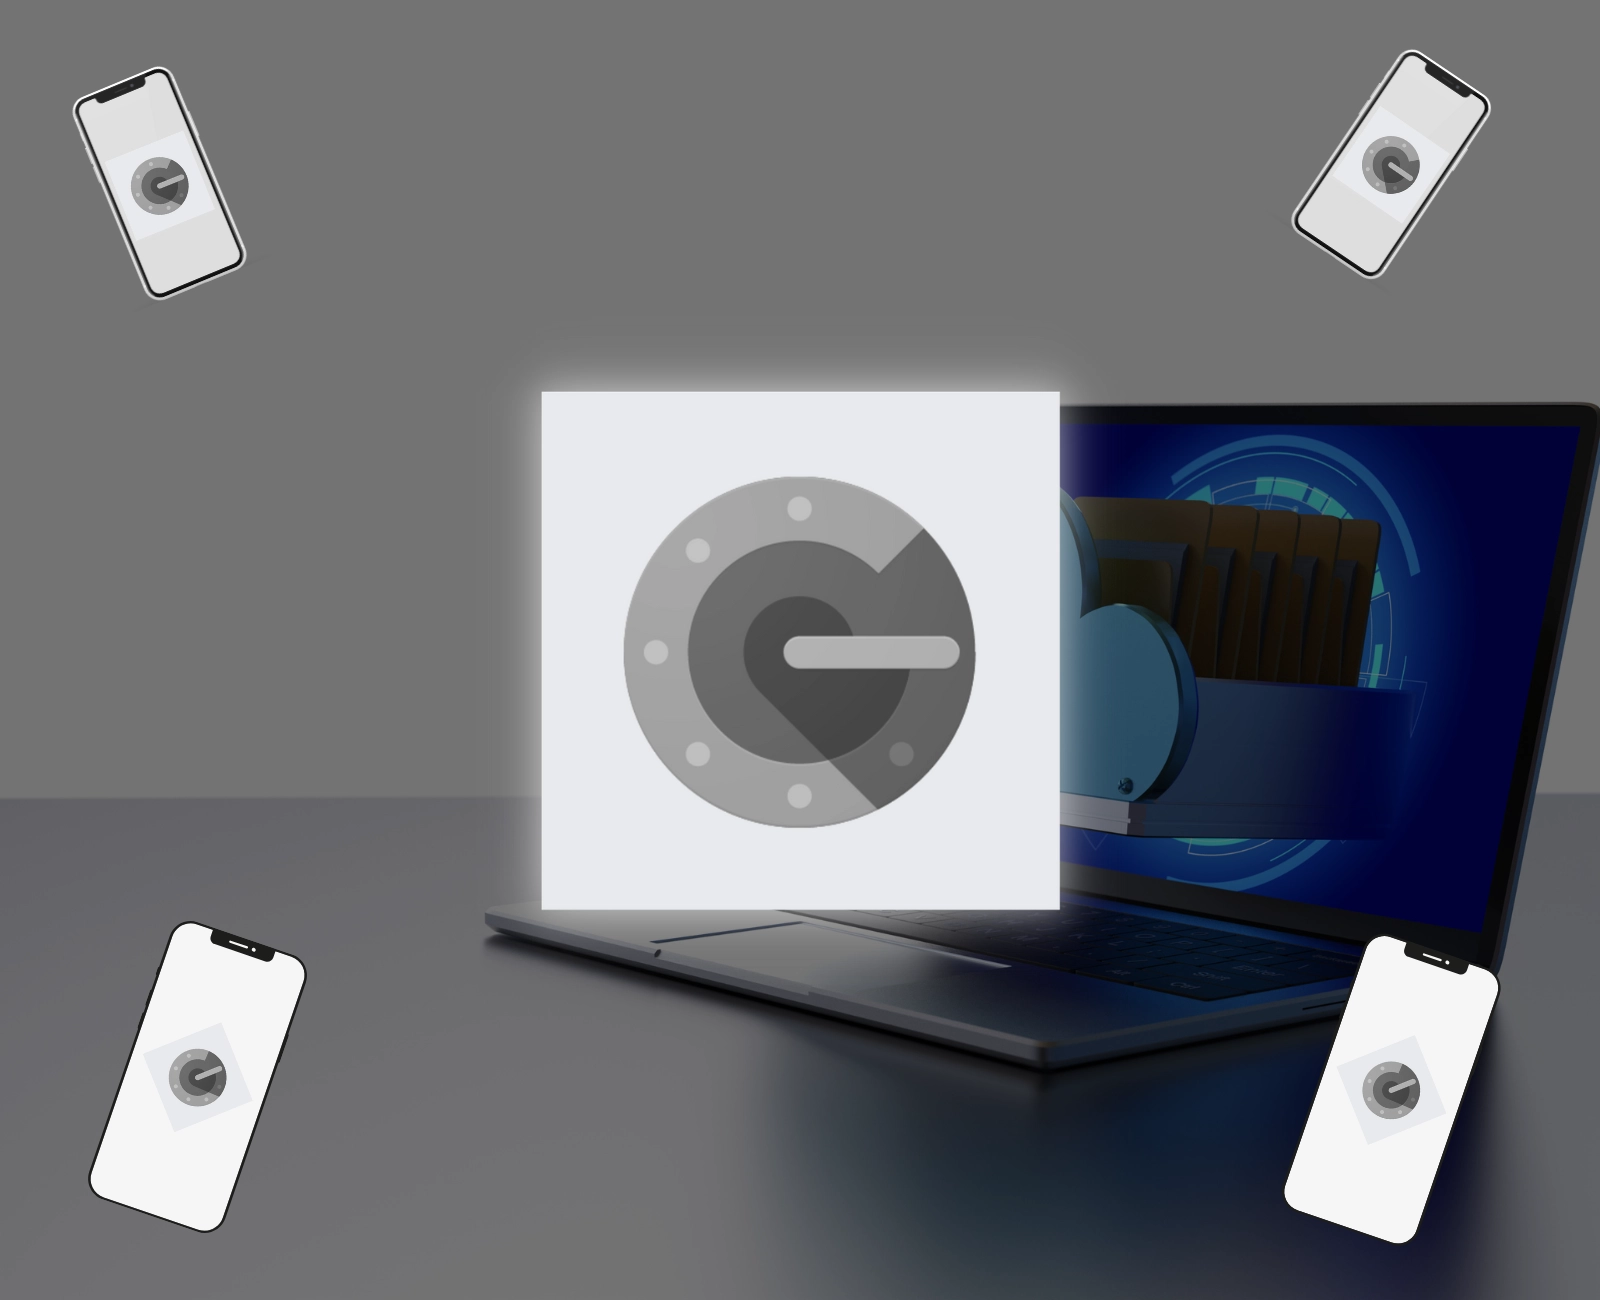 How to Backup and Restore Google Authenticator